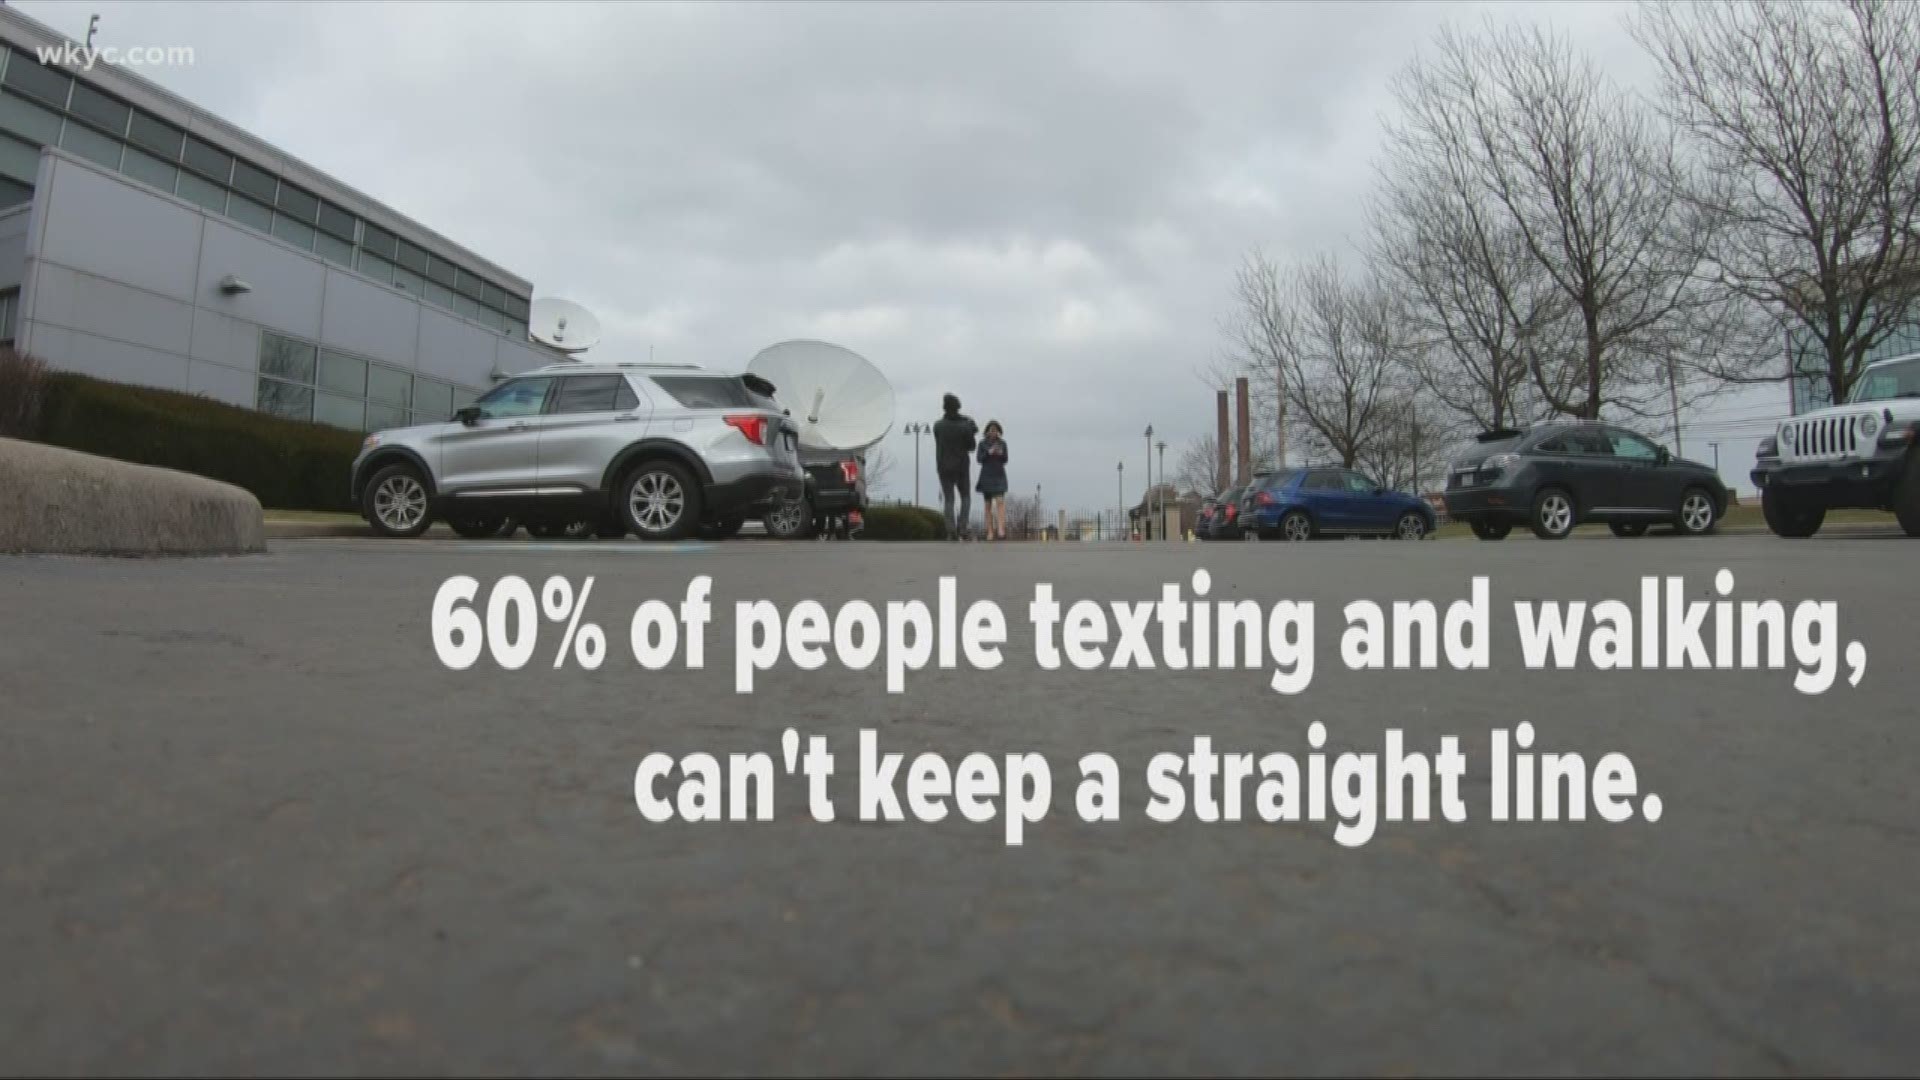 Employees were put through an experiment to see what all they notice while texting and walking. The results were surprising for those involved.